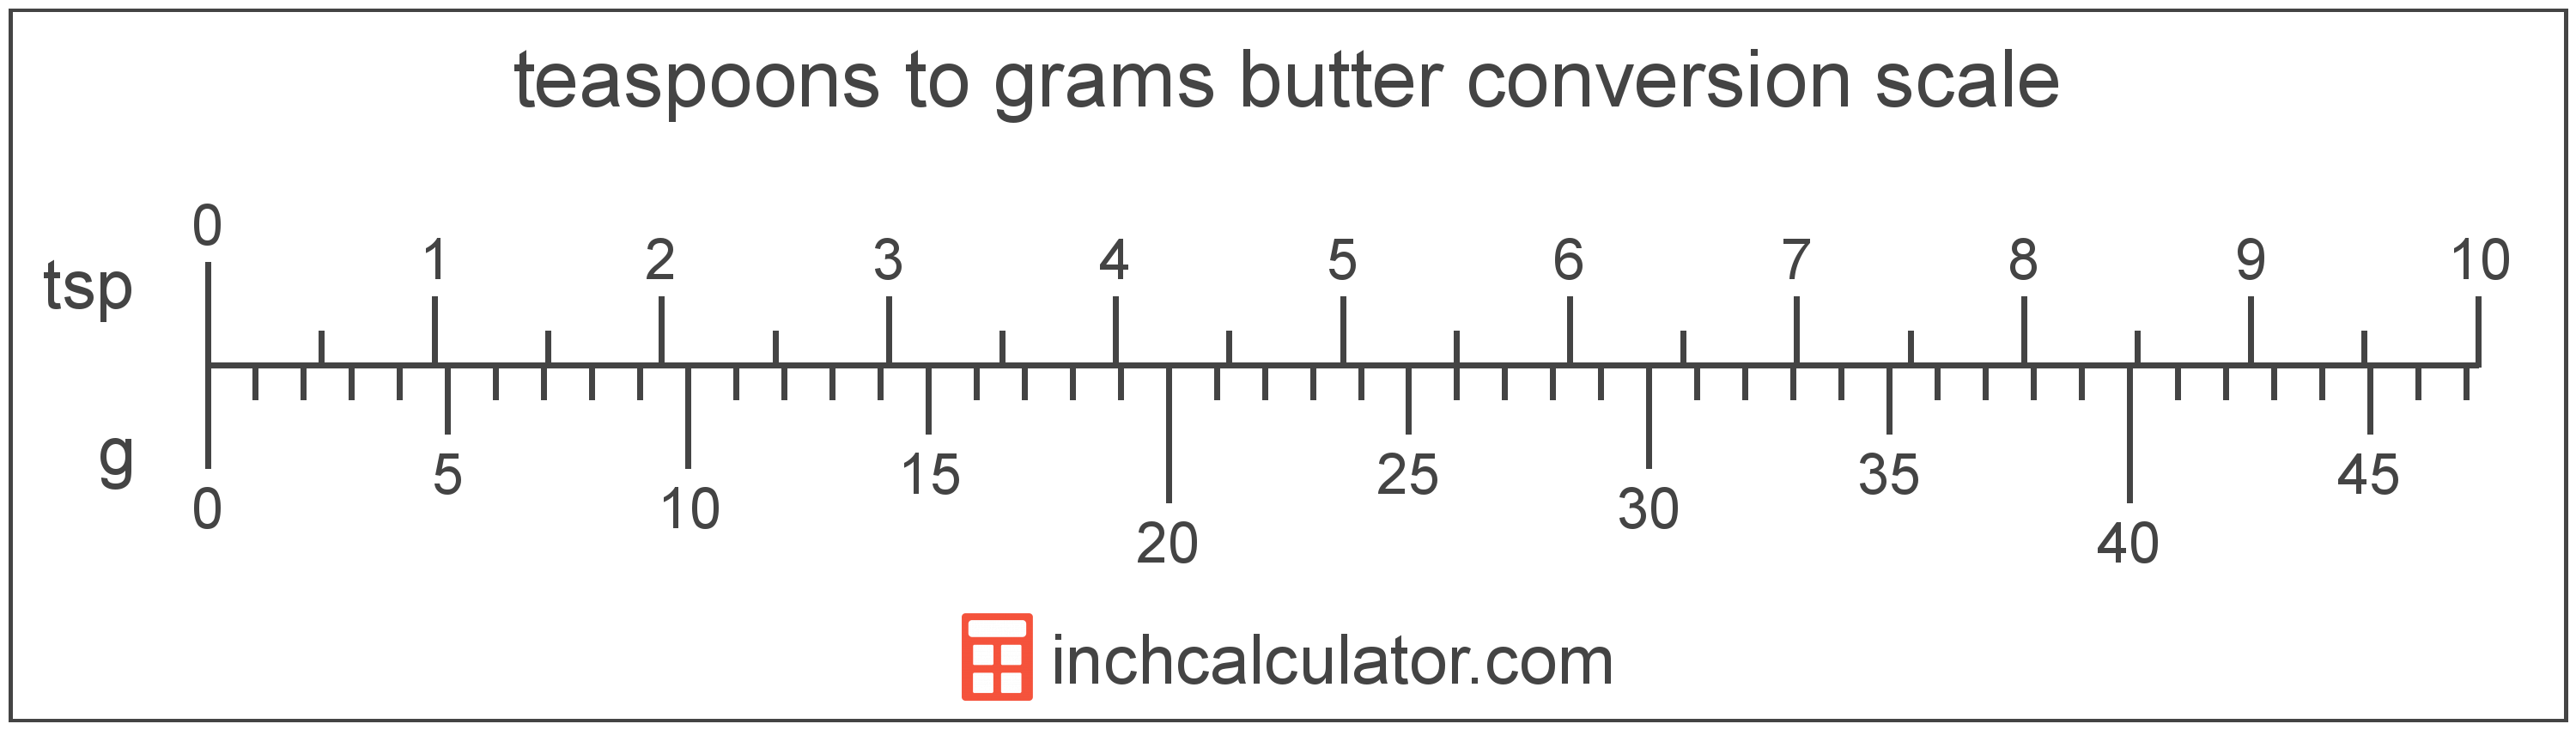 conversion scale showing teaspoons and equivalent grams butter values